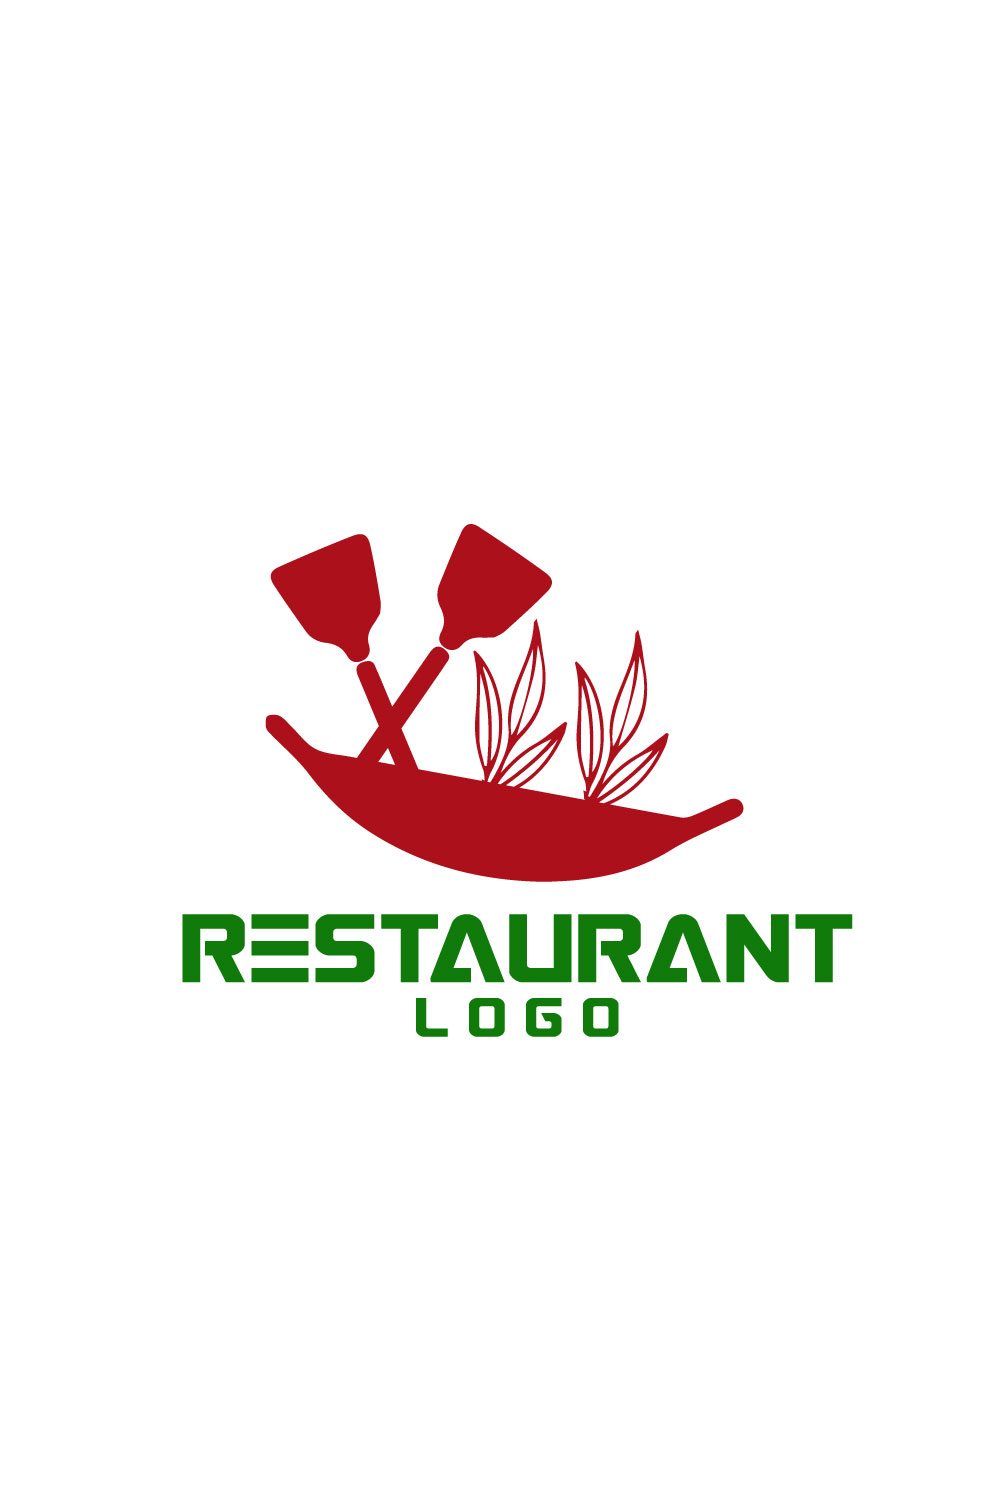 Free Culinary Creations logo pinterest preview image.